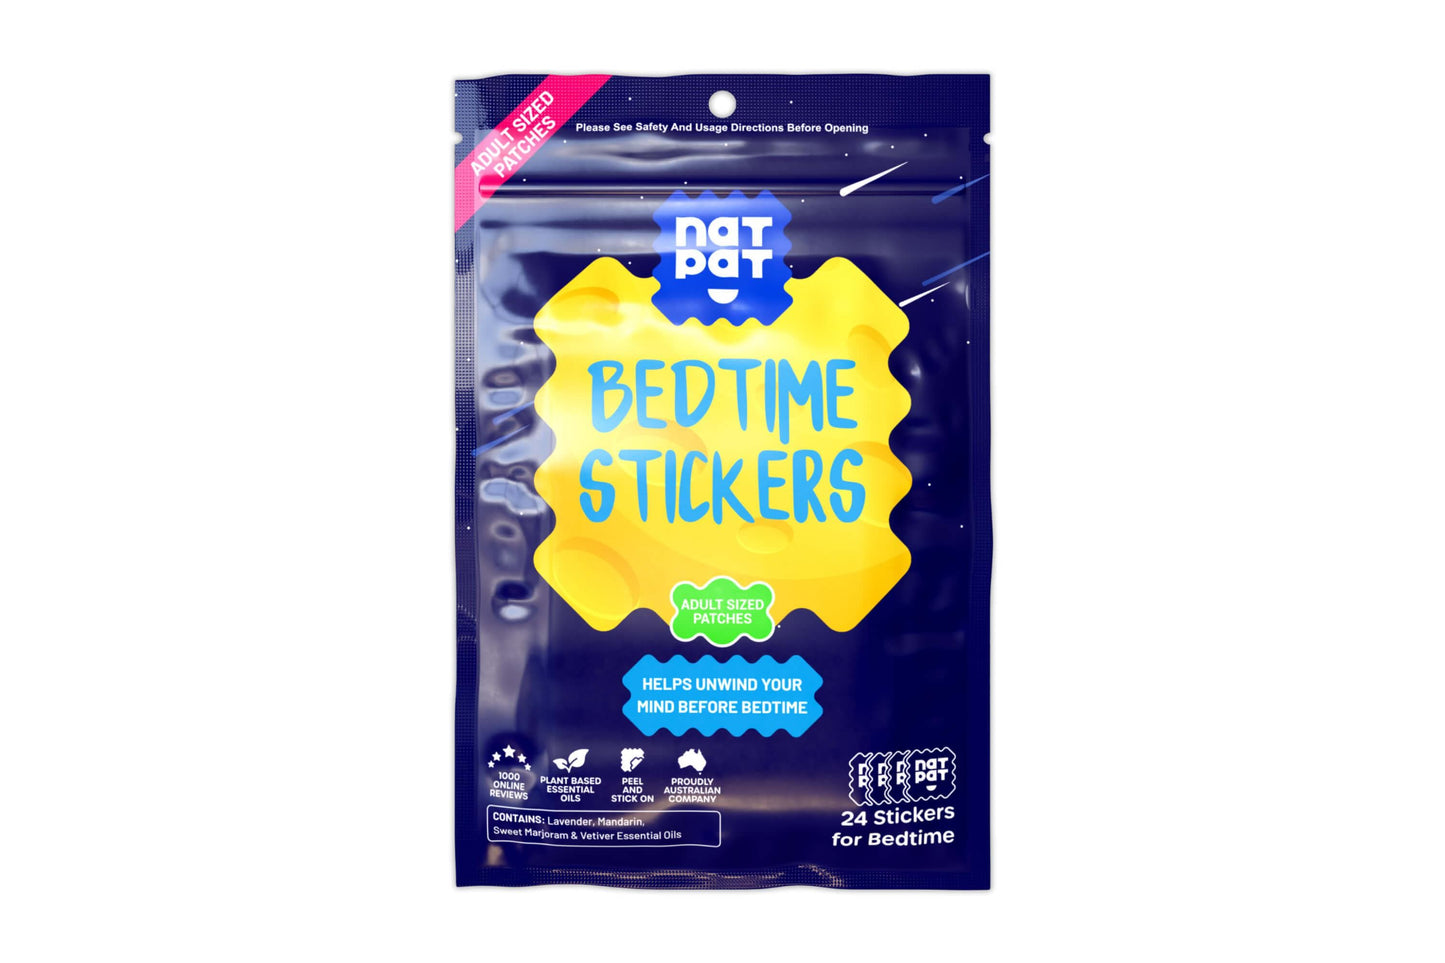 Sleep Patches for Adults - Sleep Promoting Stickers